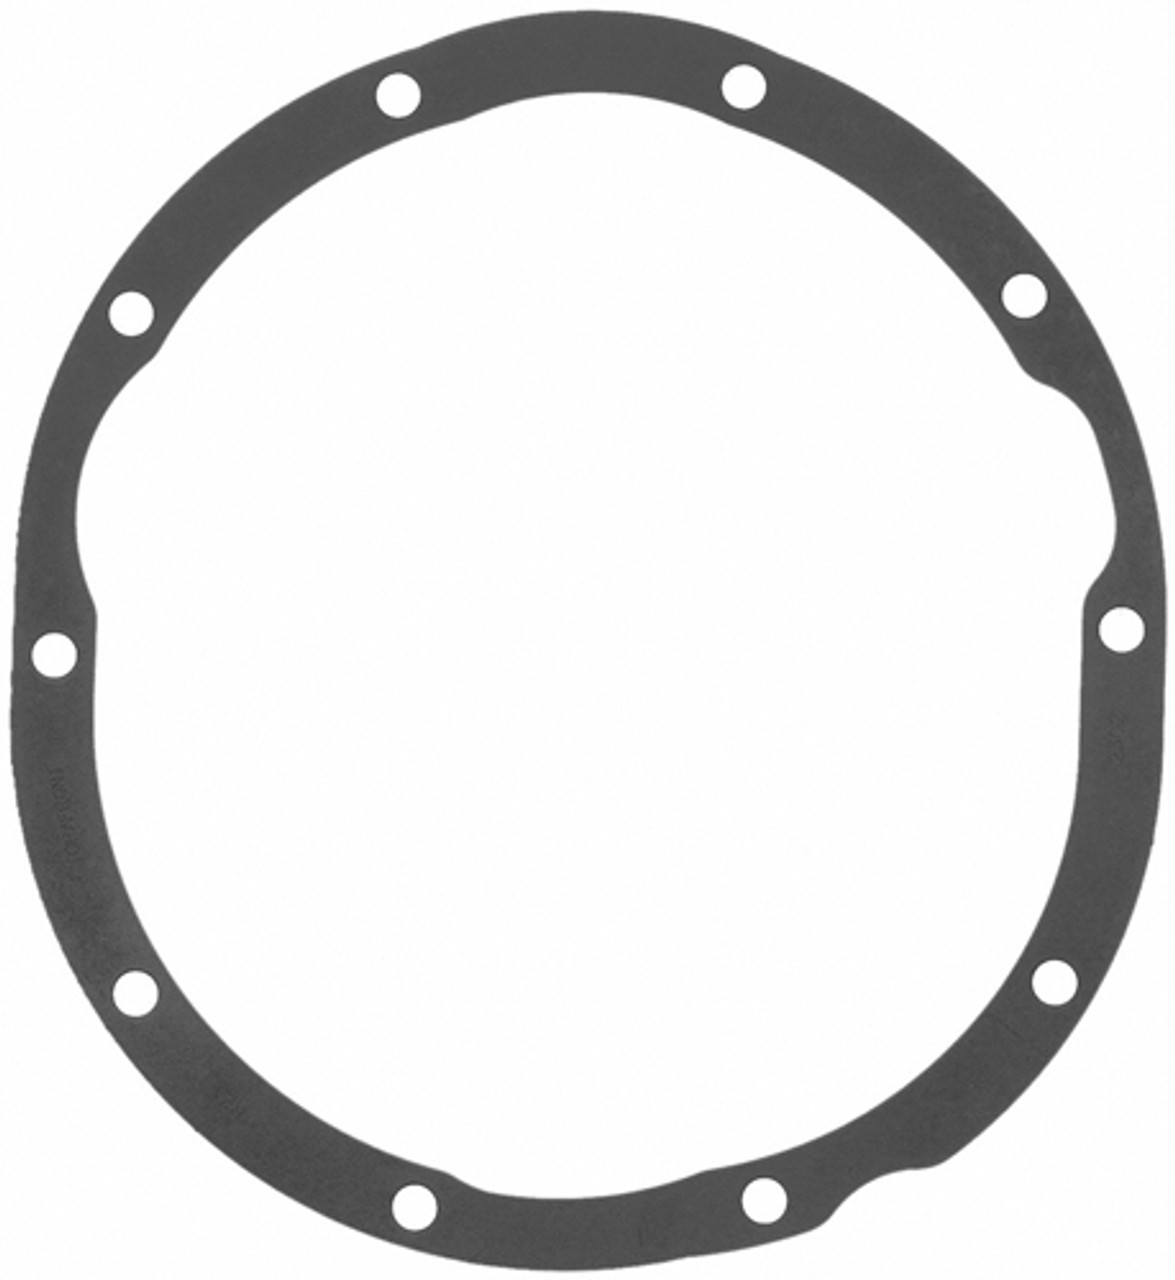 Felpro 9" Ford Differential Gasket